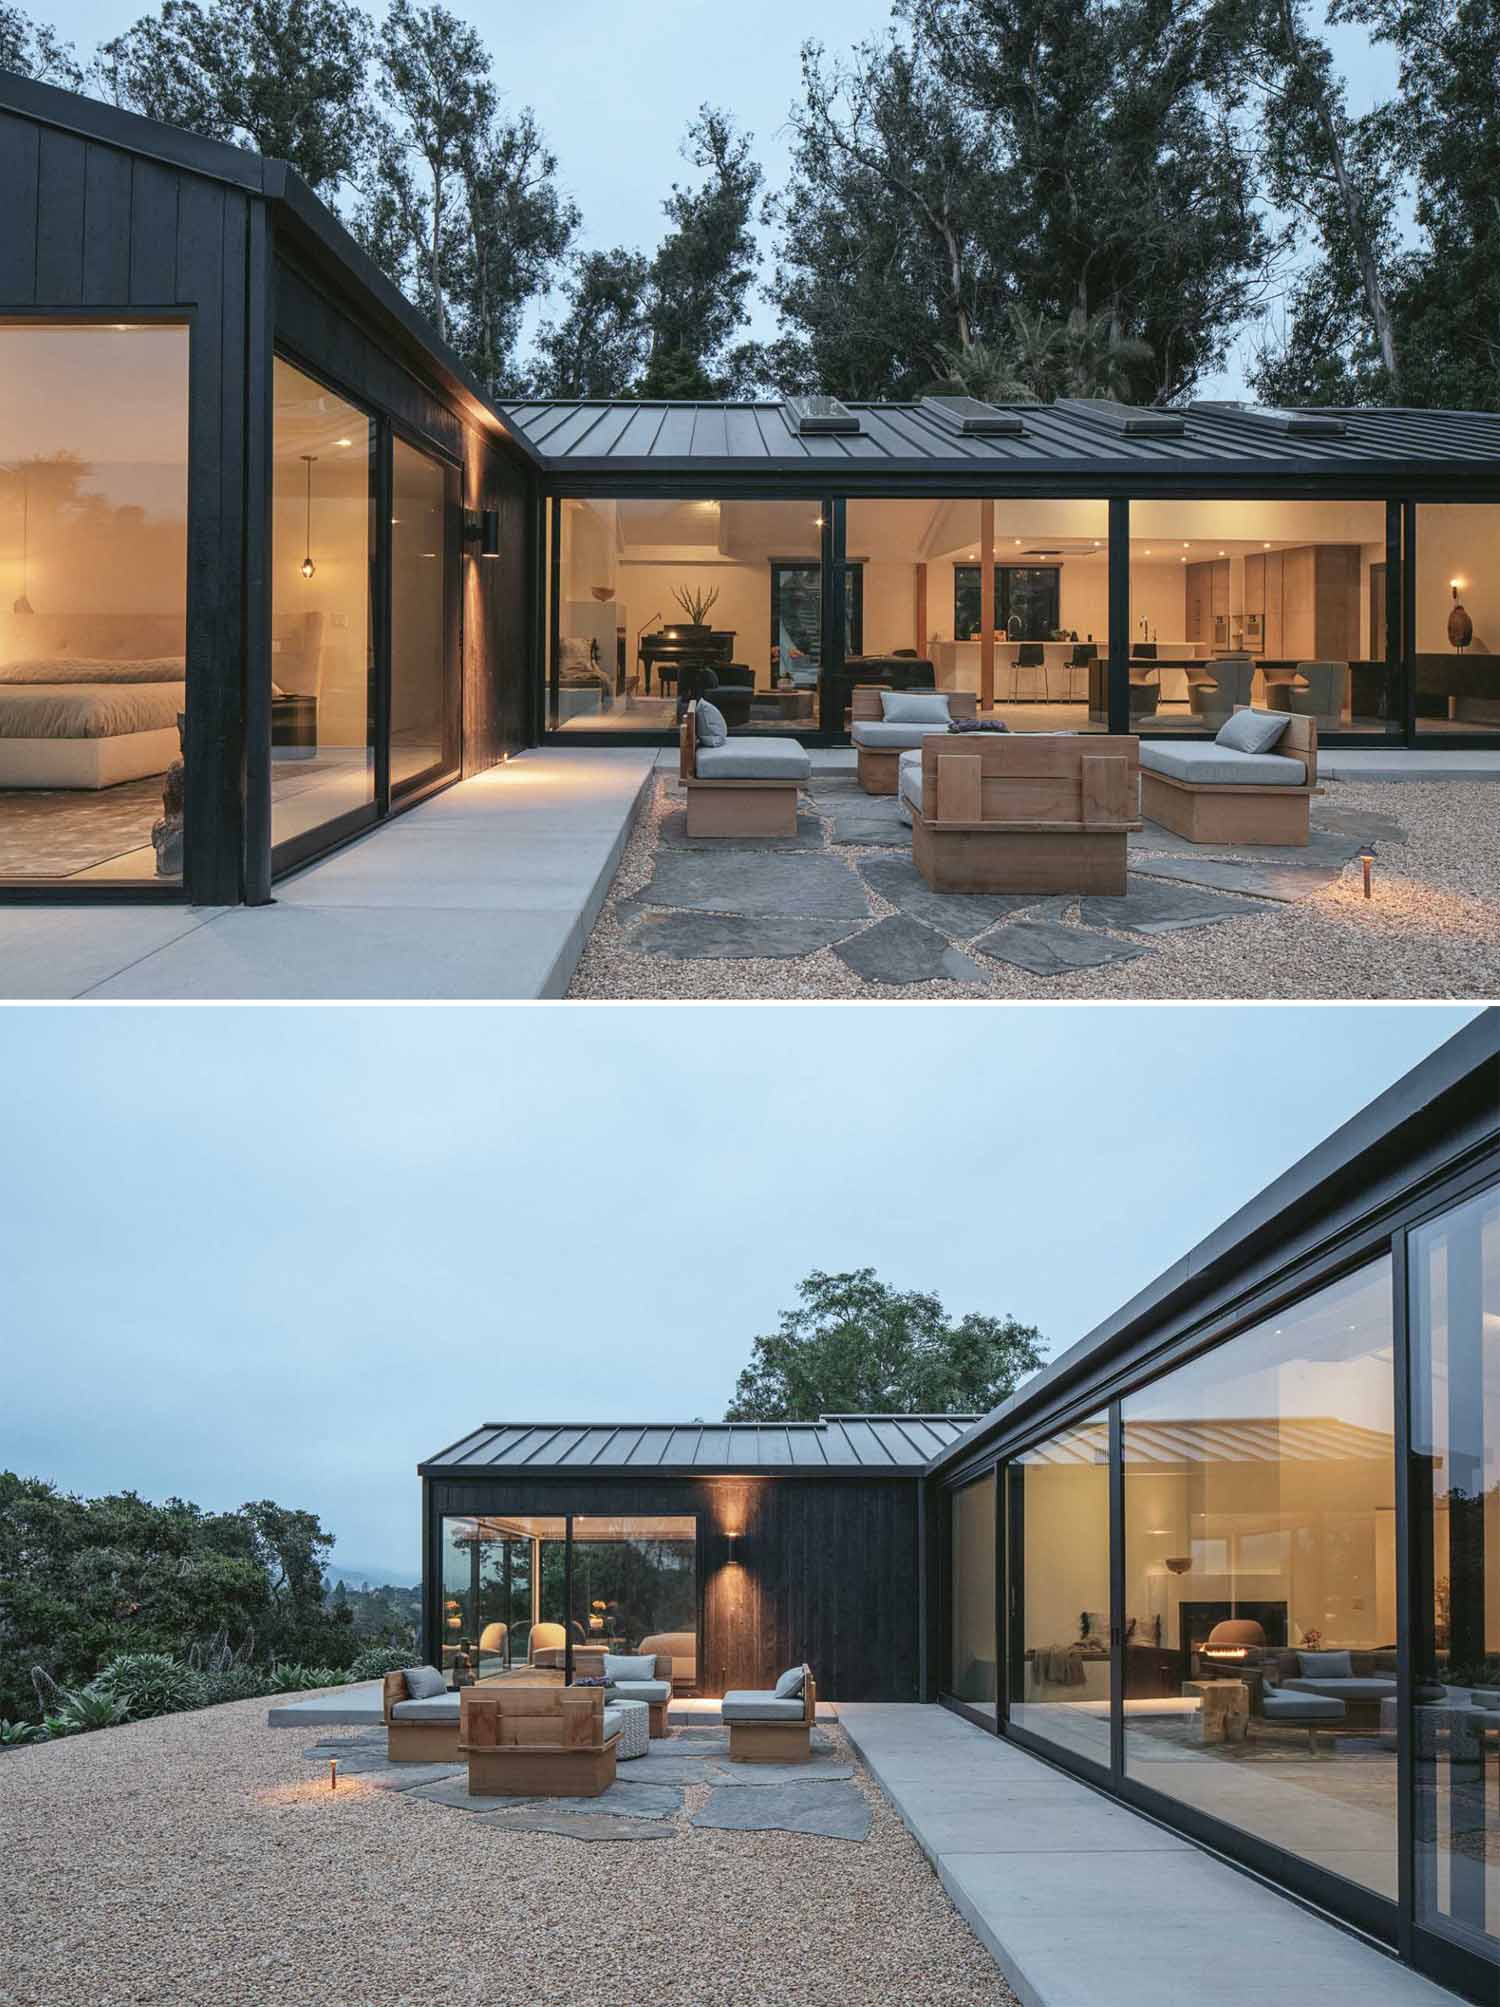 This modern home has concrete floors that flow from inside to outside, and together with new anodized aluminum-and-glass sliding doors, reinforce connections to the landscape.